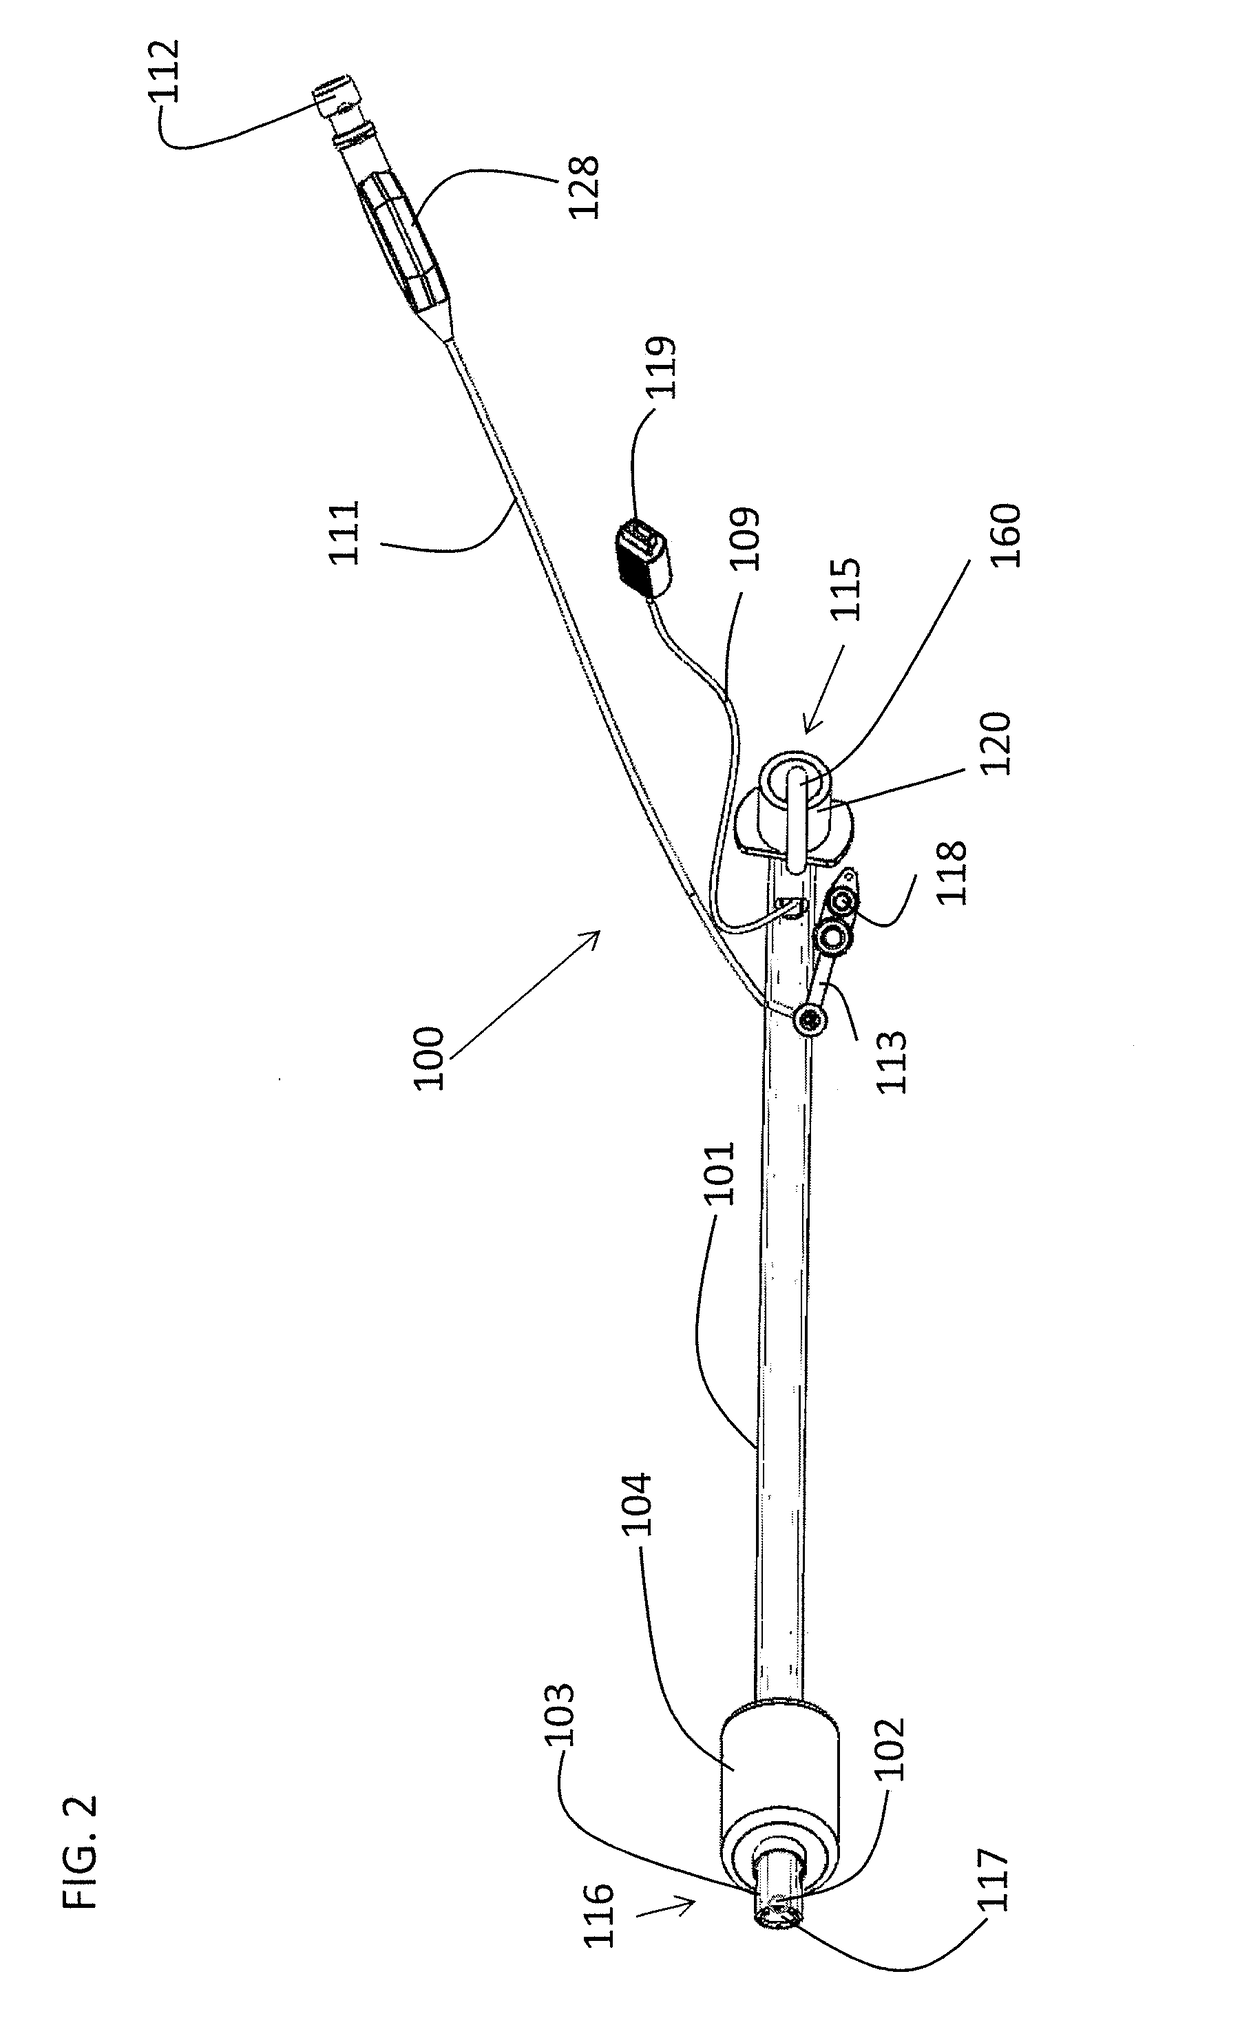 Endotracheal tube with visualization capabilities and a laryngeal mask